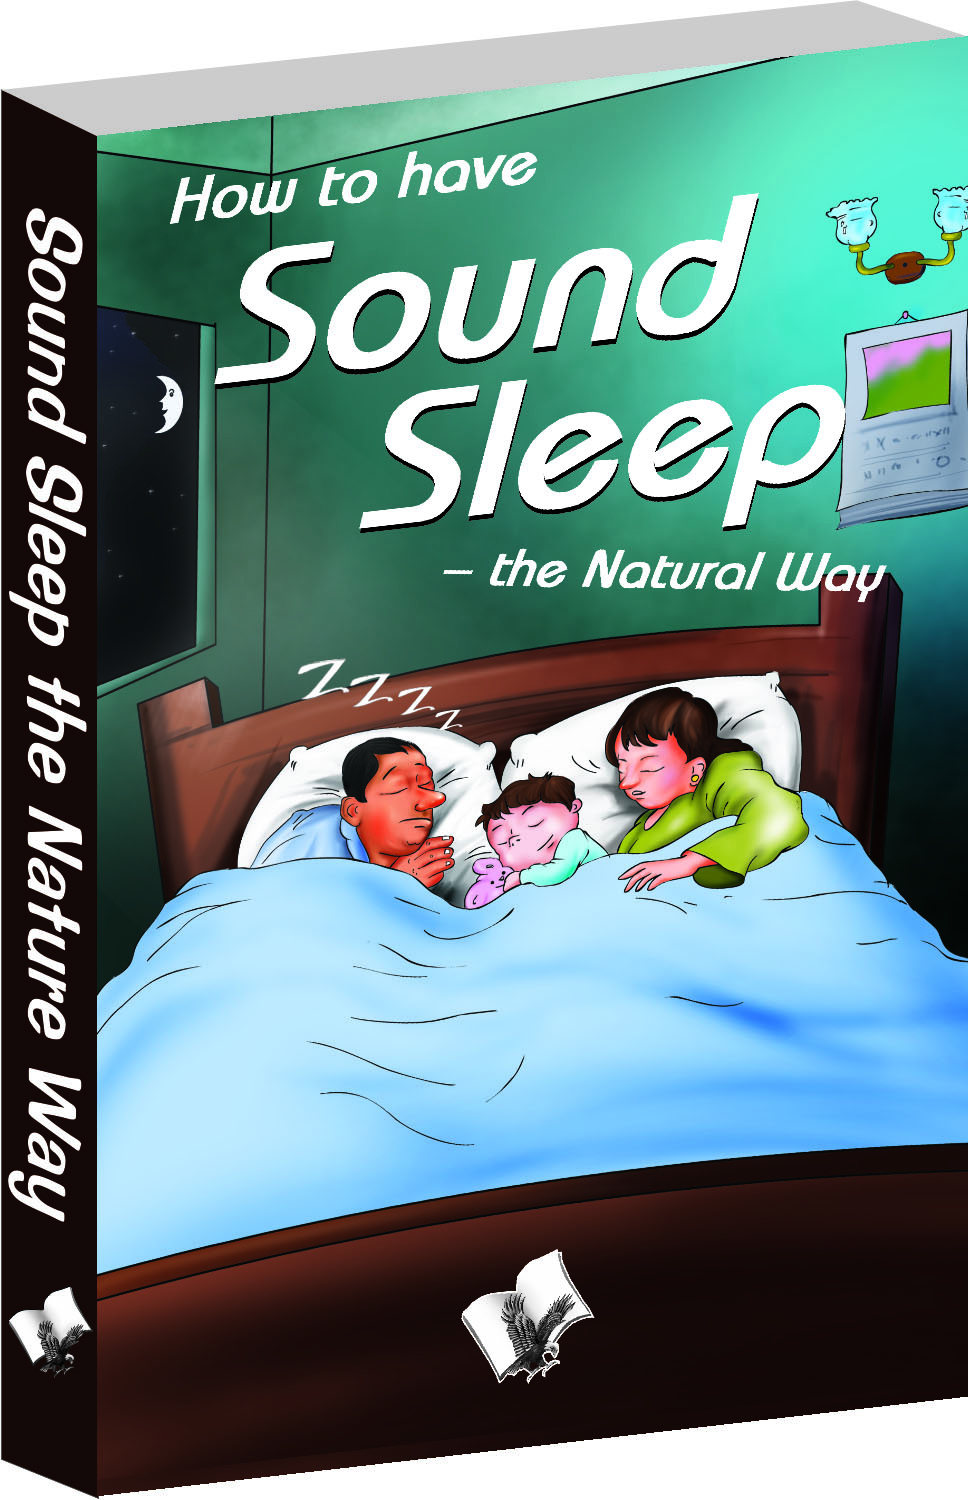 How To Have Sound Sleep - The Natural Way-Simple ideas that effectively induce sleep